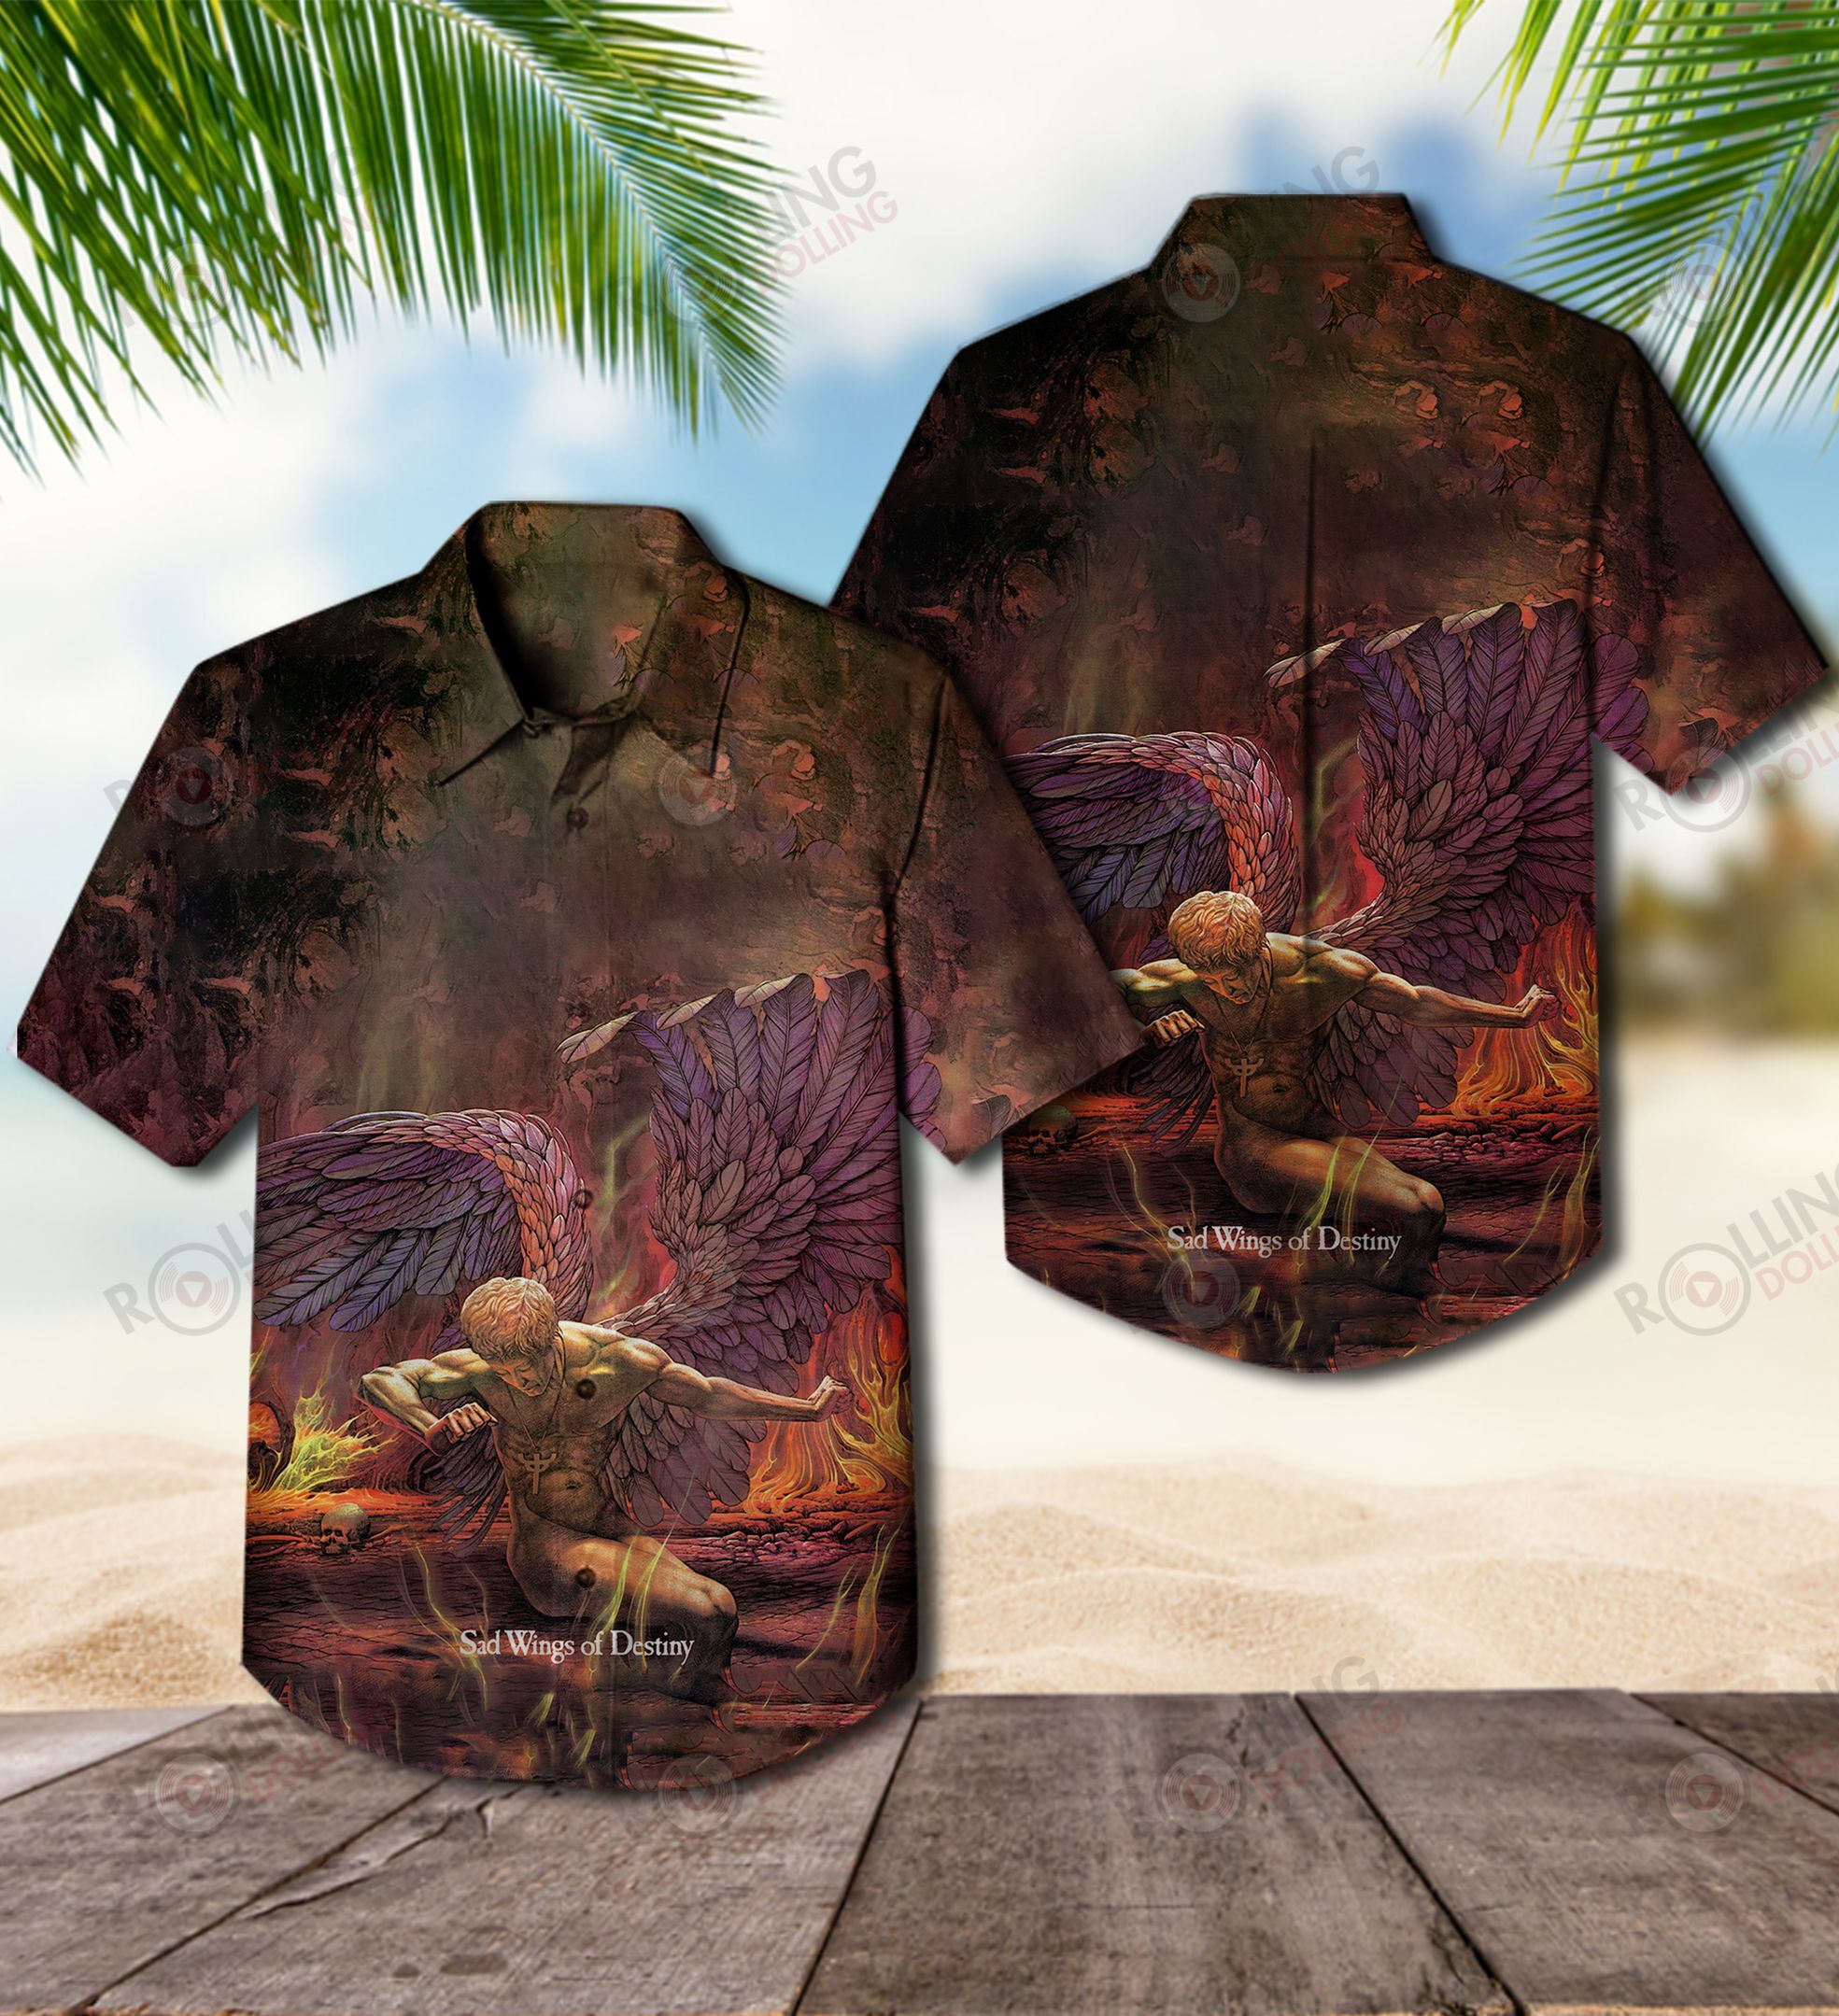 This would make a great gift for any fan who loves Hawaiian Shirt as well as Rock band 119